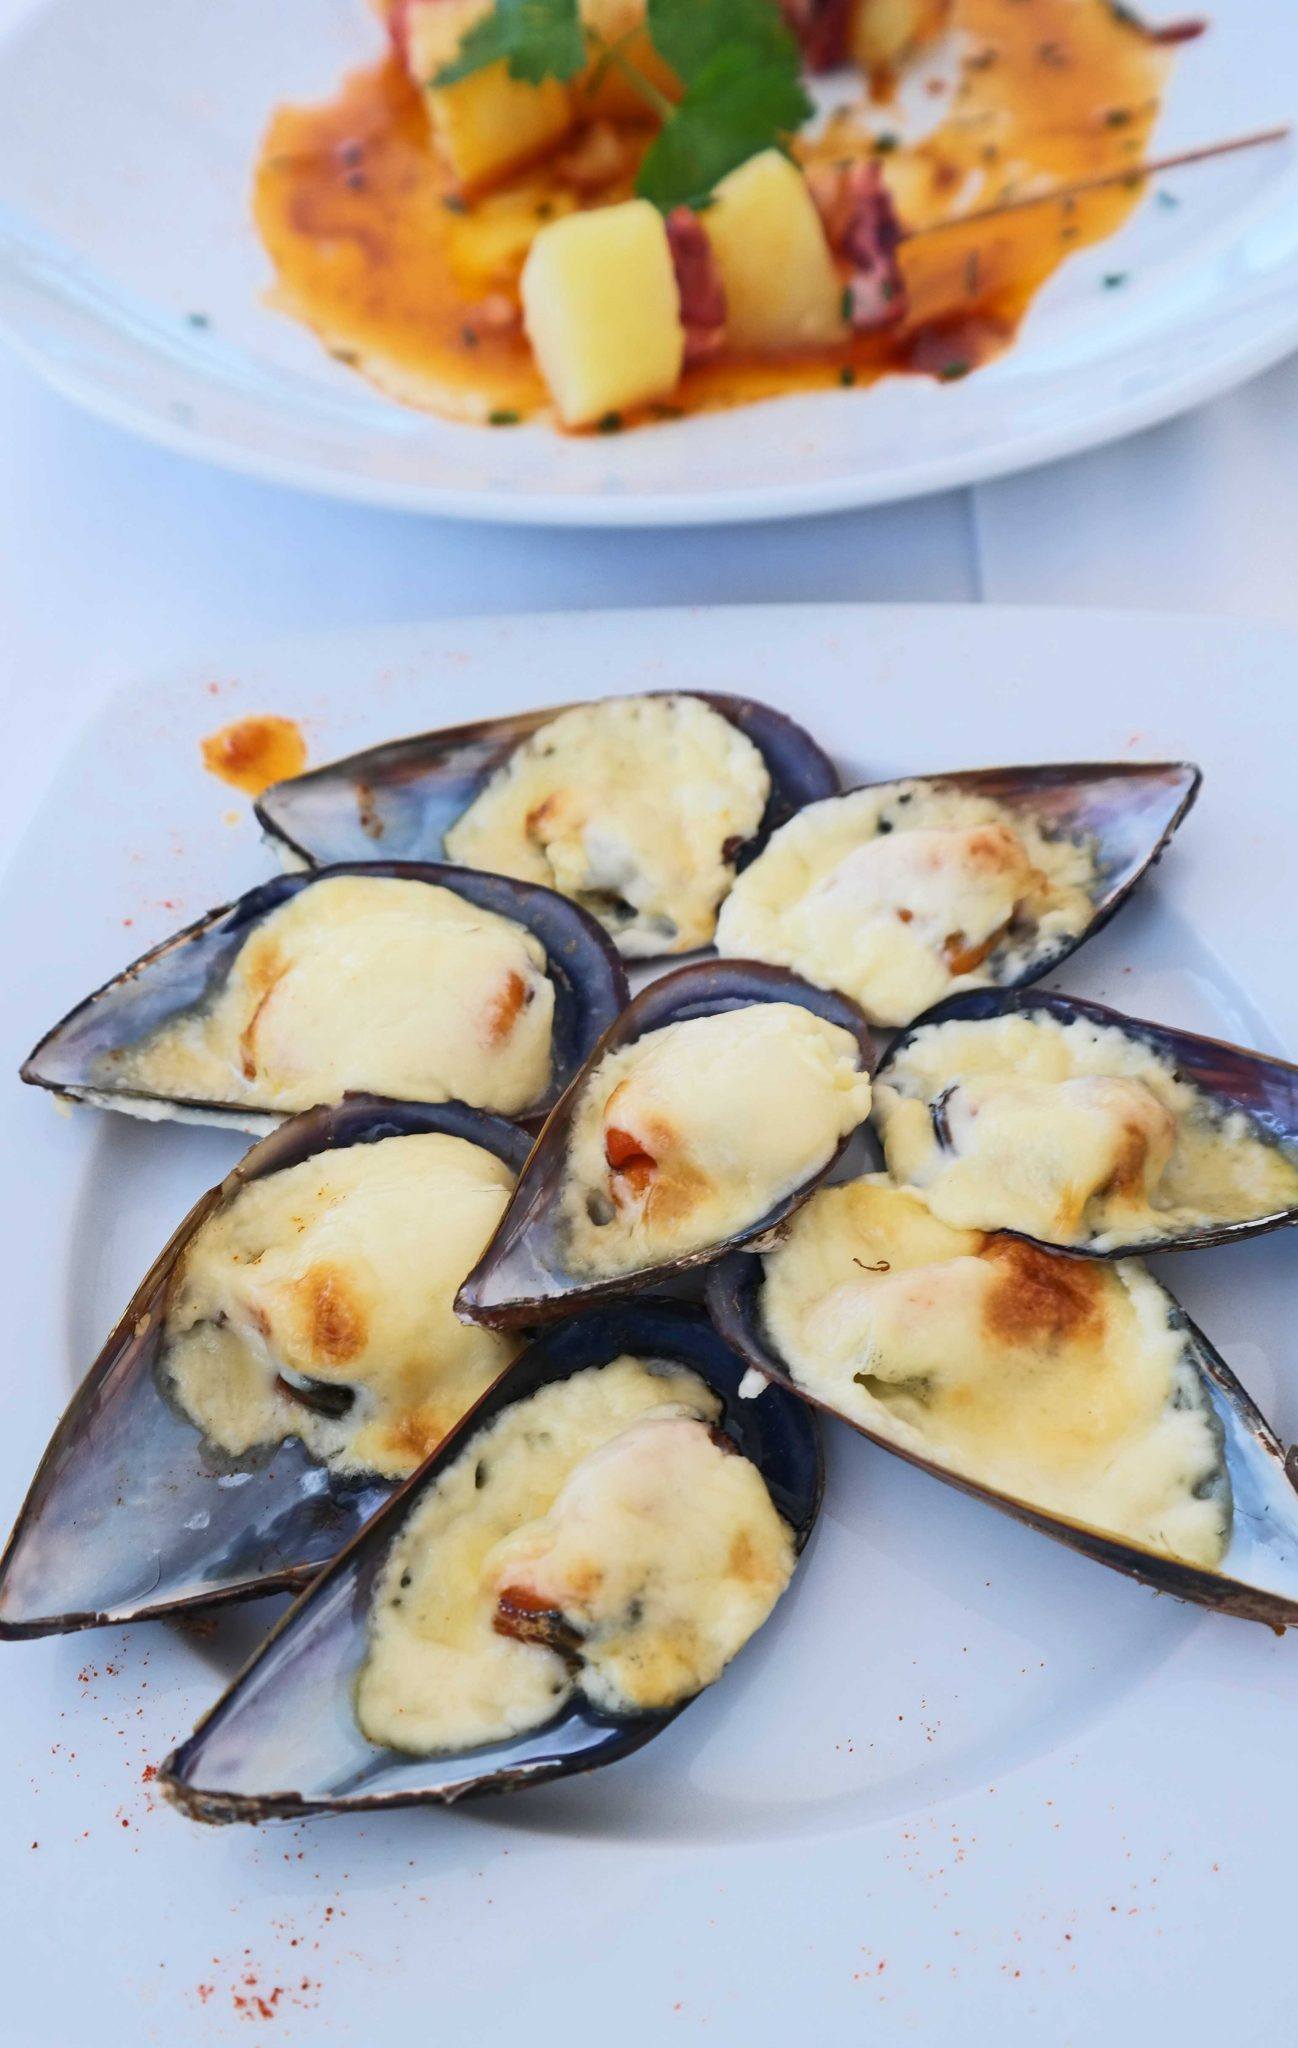 Seafood in Catalonia